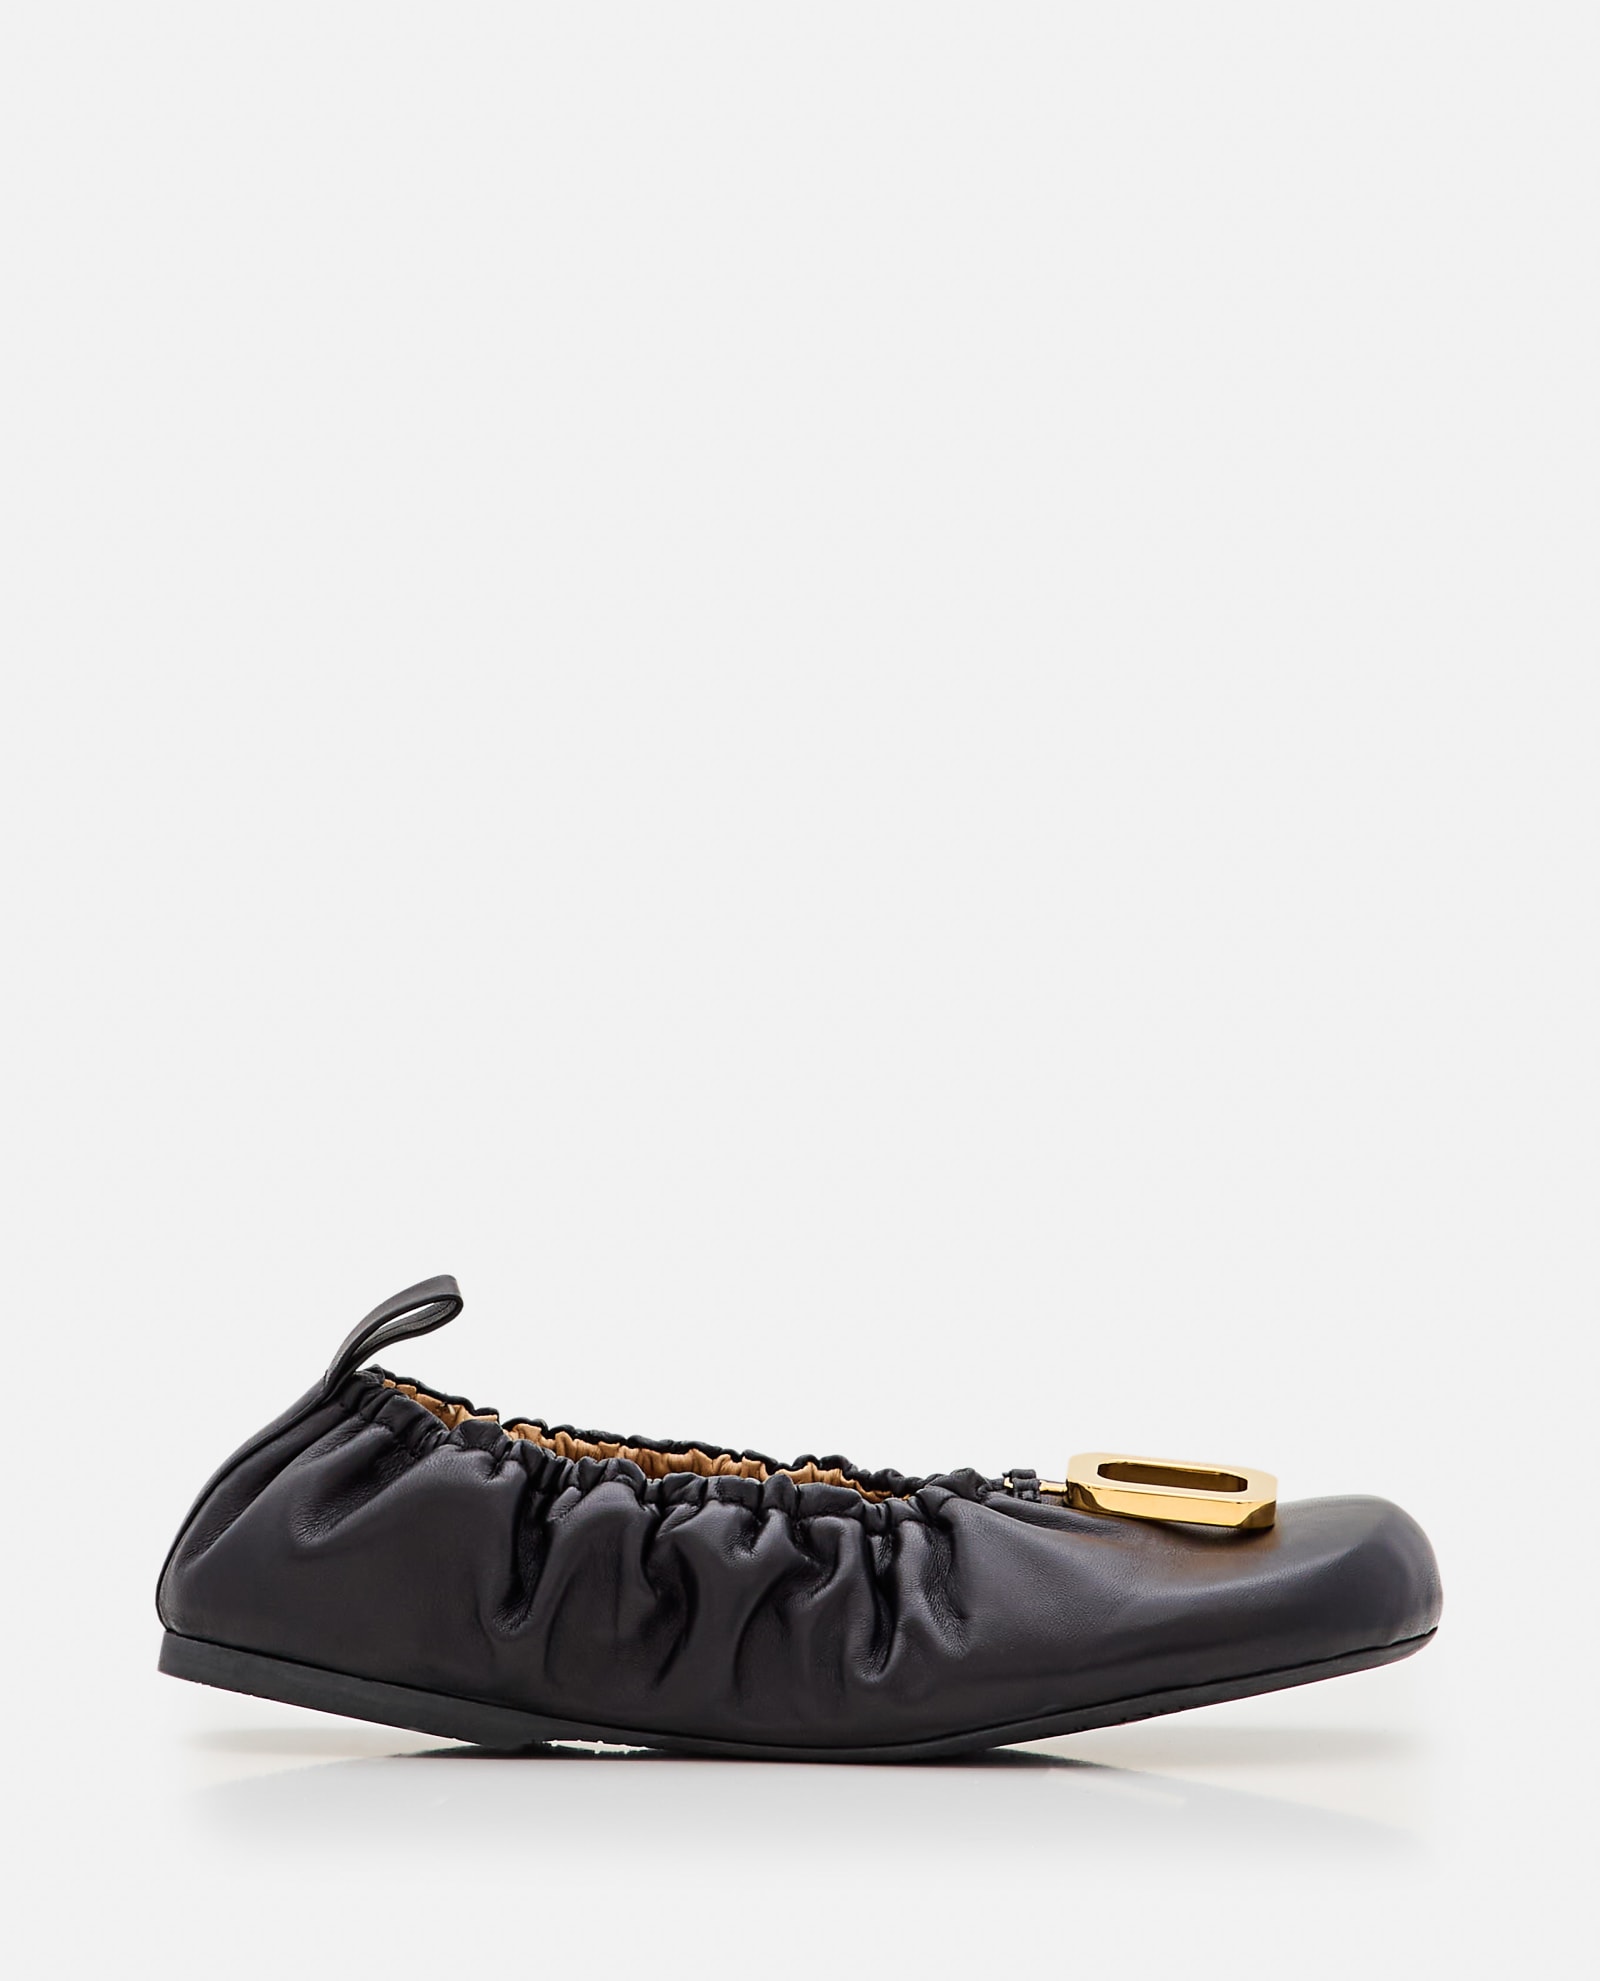 J.W. Anderson Leather Ballet Flats